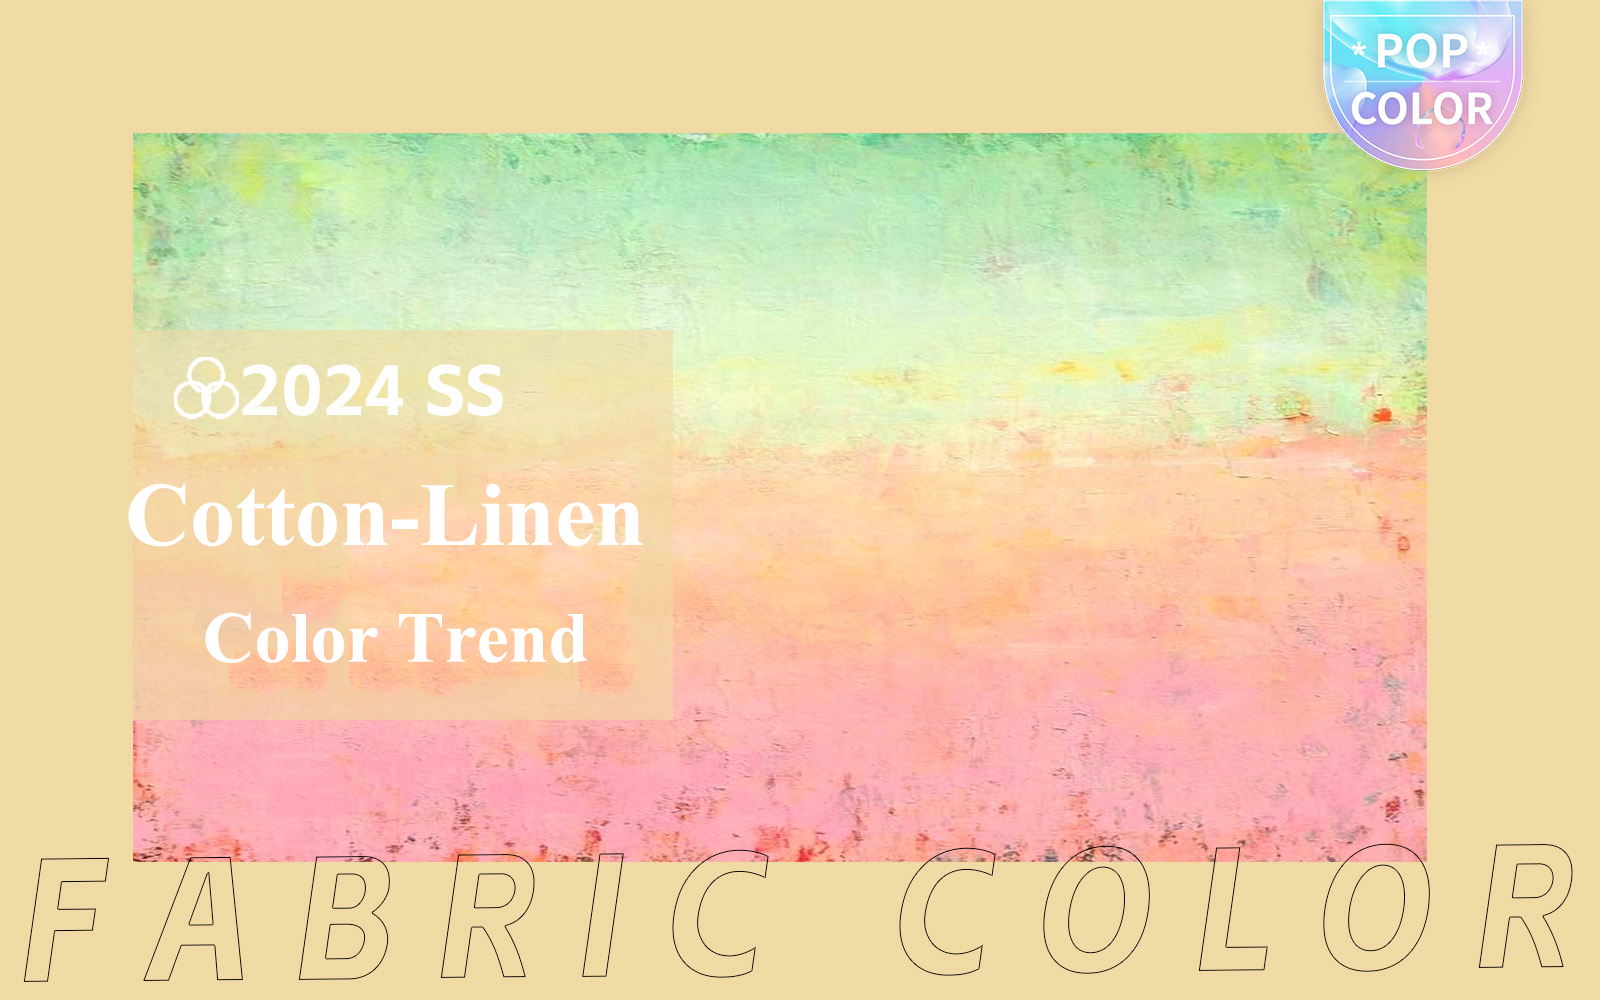 The Color Trend for Cotton-linen Fabric